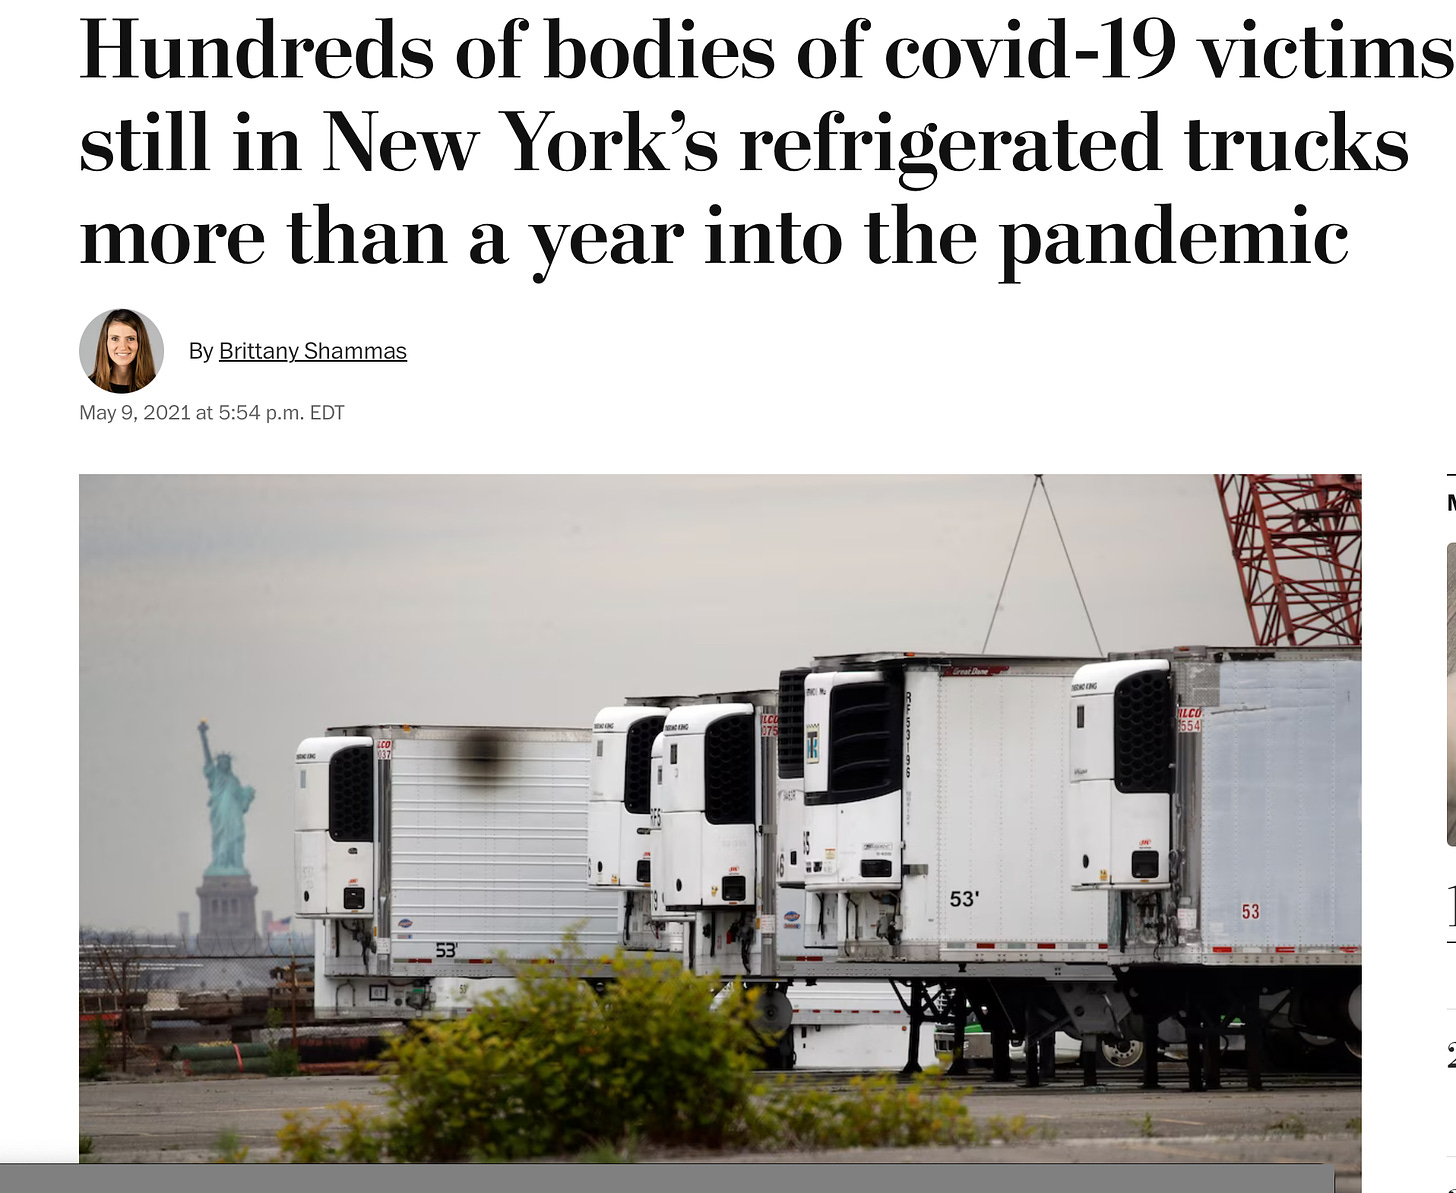 screenshot from Washington Post news article: Hundredds of bodies of Covid victims still in New York’s refrigerated trucks more than a year into the pandemic